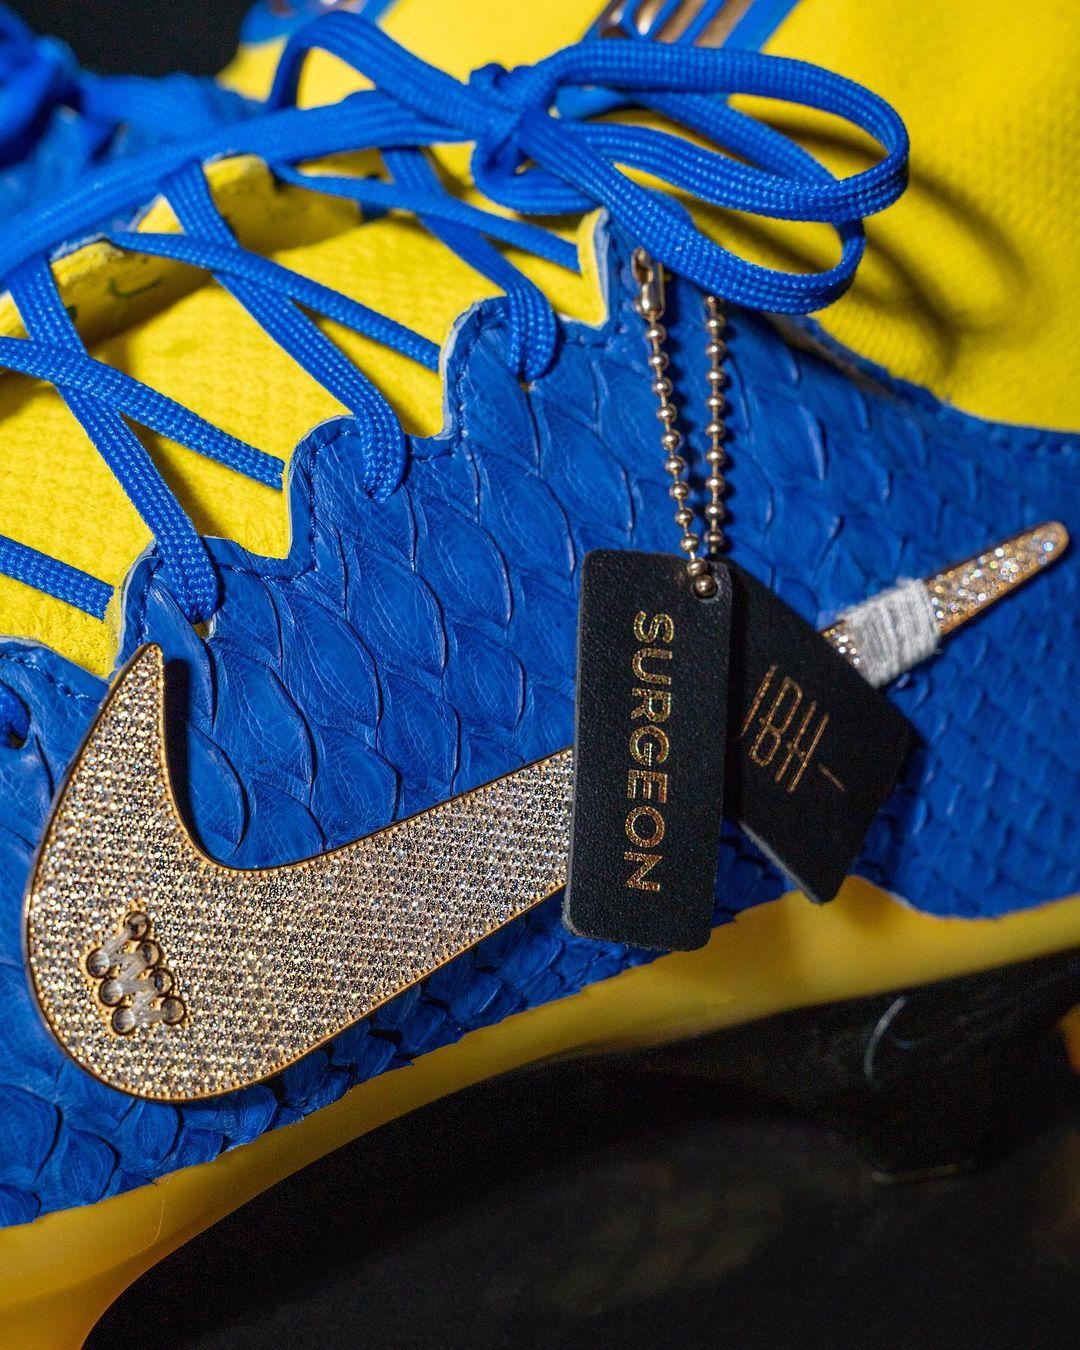 Odell Beckham Jr. showcases custom cleats collection